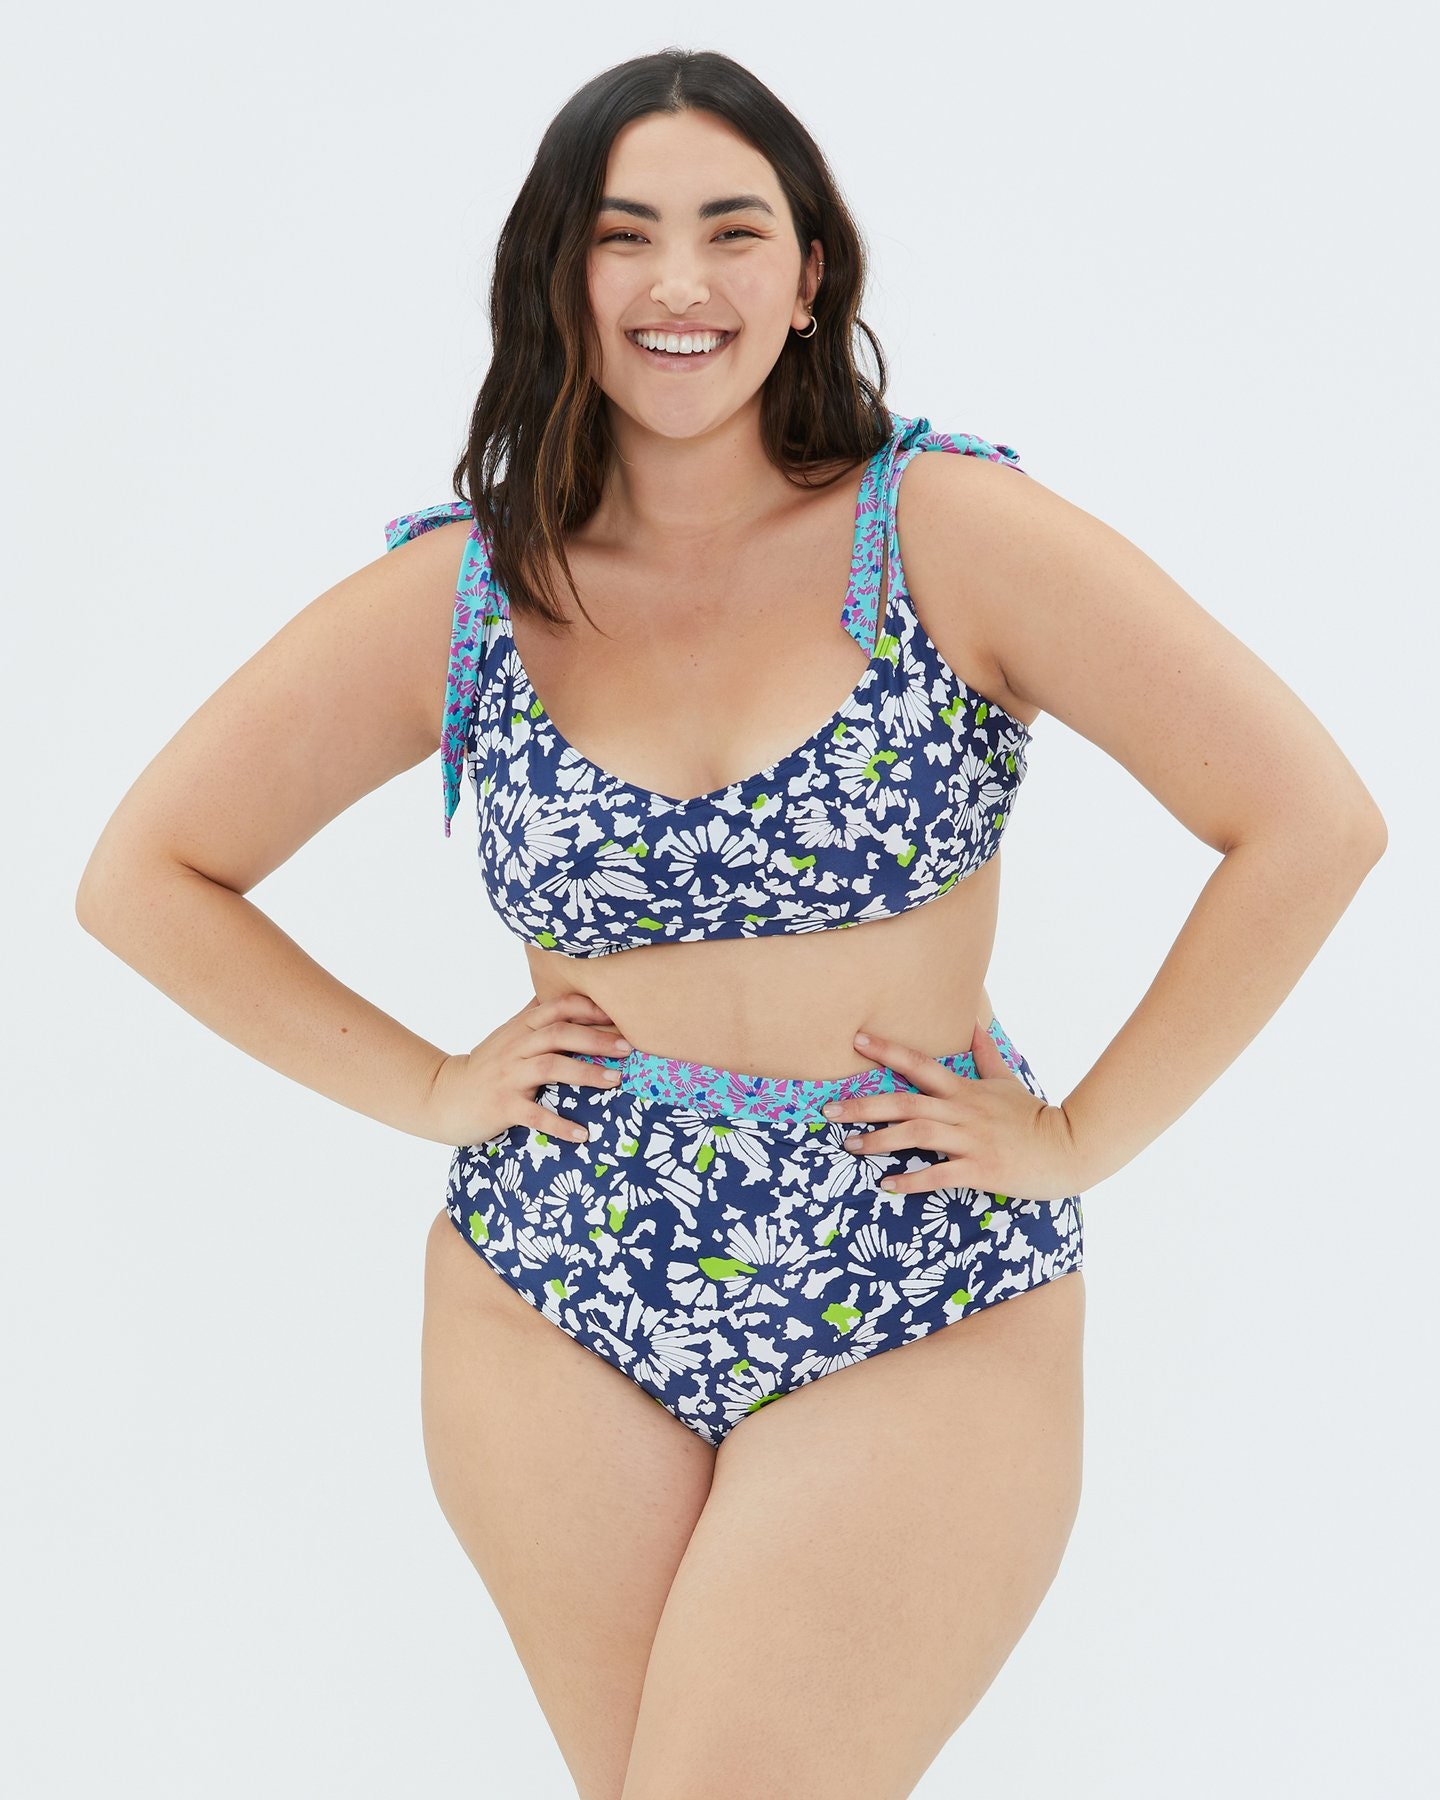 the best plus size bathing suits for fresh style comfort herstylecode 14 The Best Plus Size Bathing Suits - Swimsuits for Fresh Style & Comfort